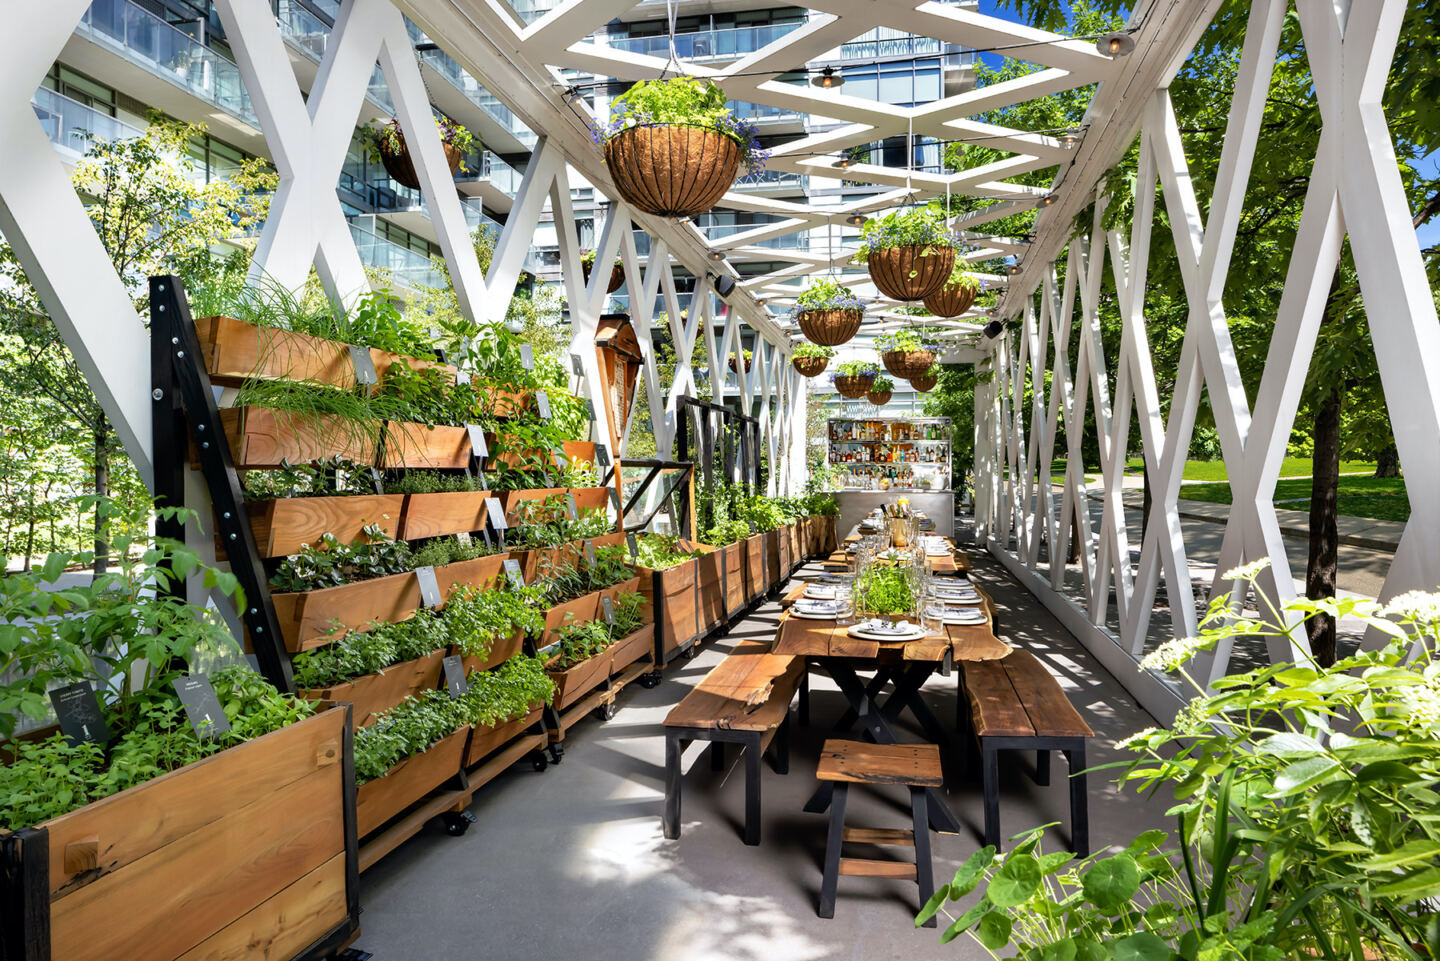 The garden pavillion at 1 Hotel Toronto, a biophilic hotel that celebrates the beauty of Toronto’s natural environment